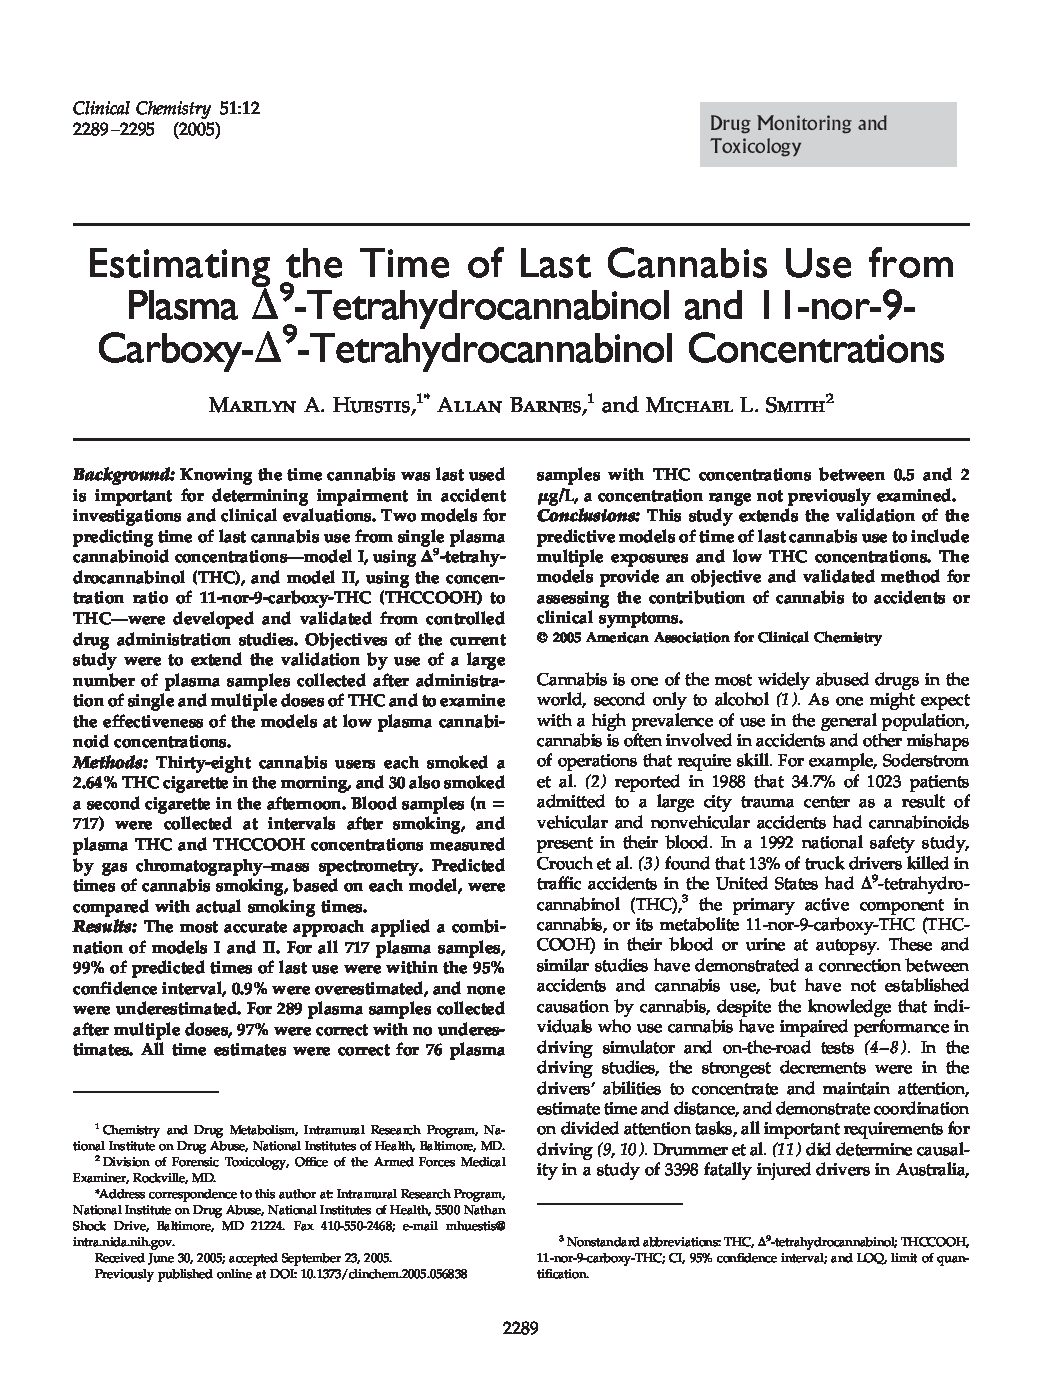 Estimating the Time of Last Cannabis Use from Plasma